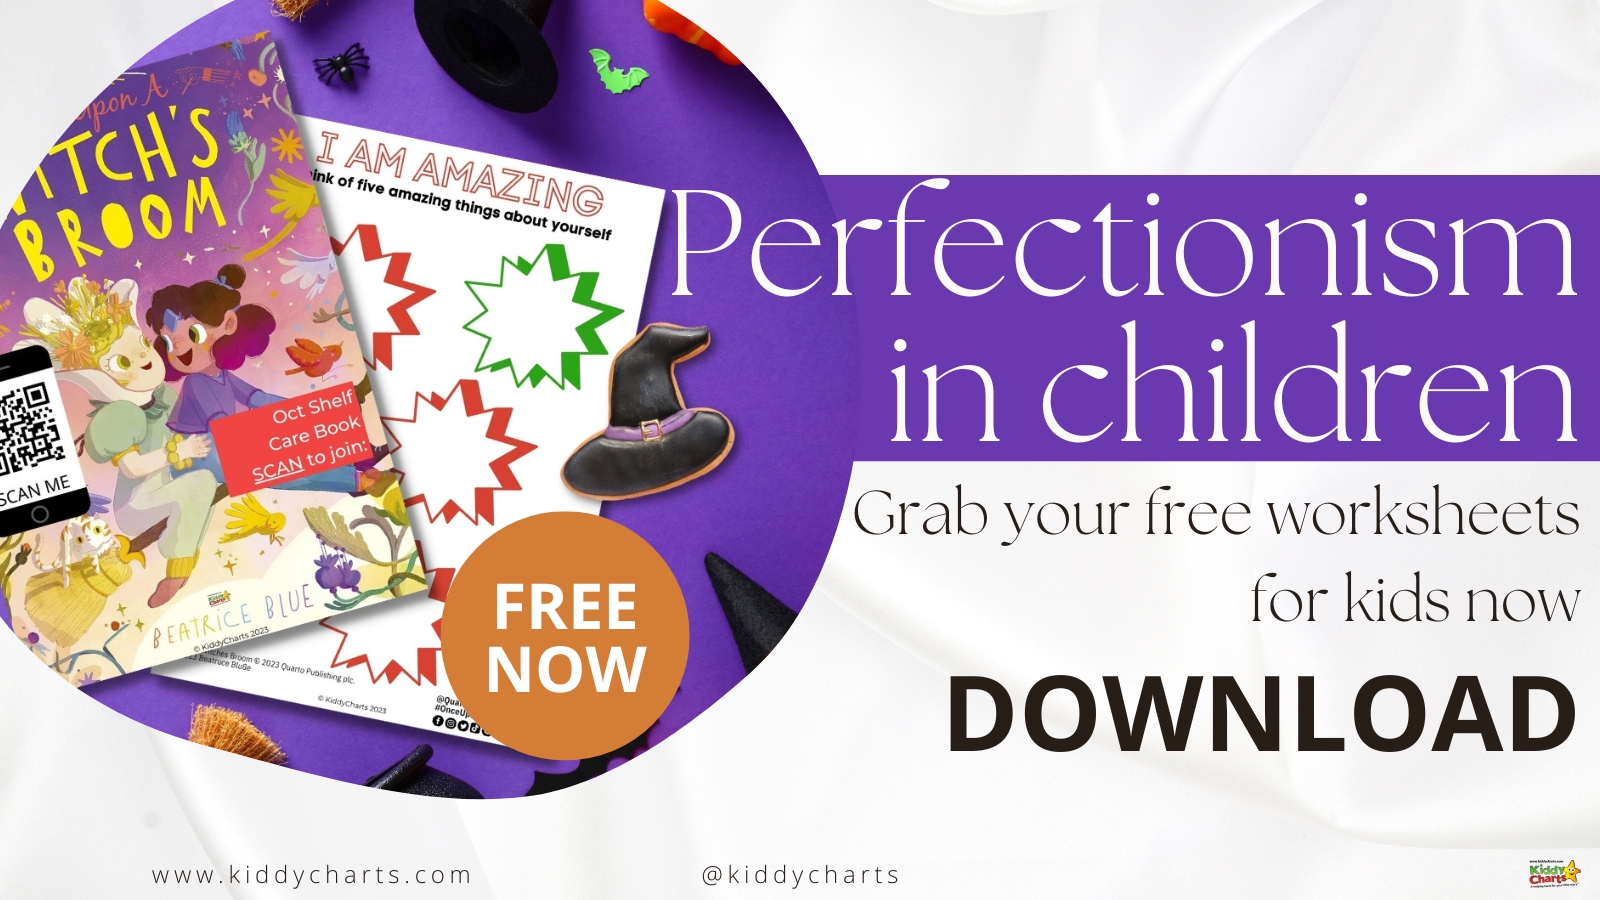 Perfectionism in children simple worksheets: Once upon a witch’s broom